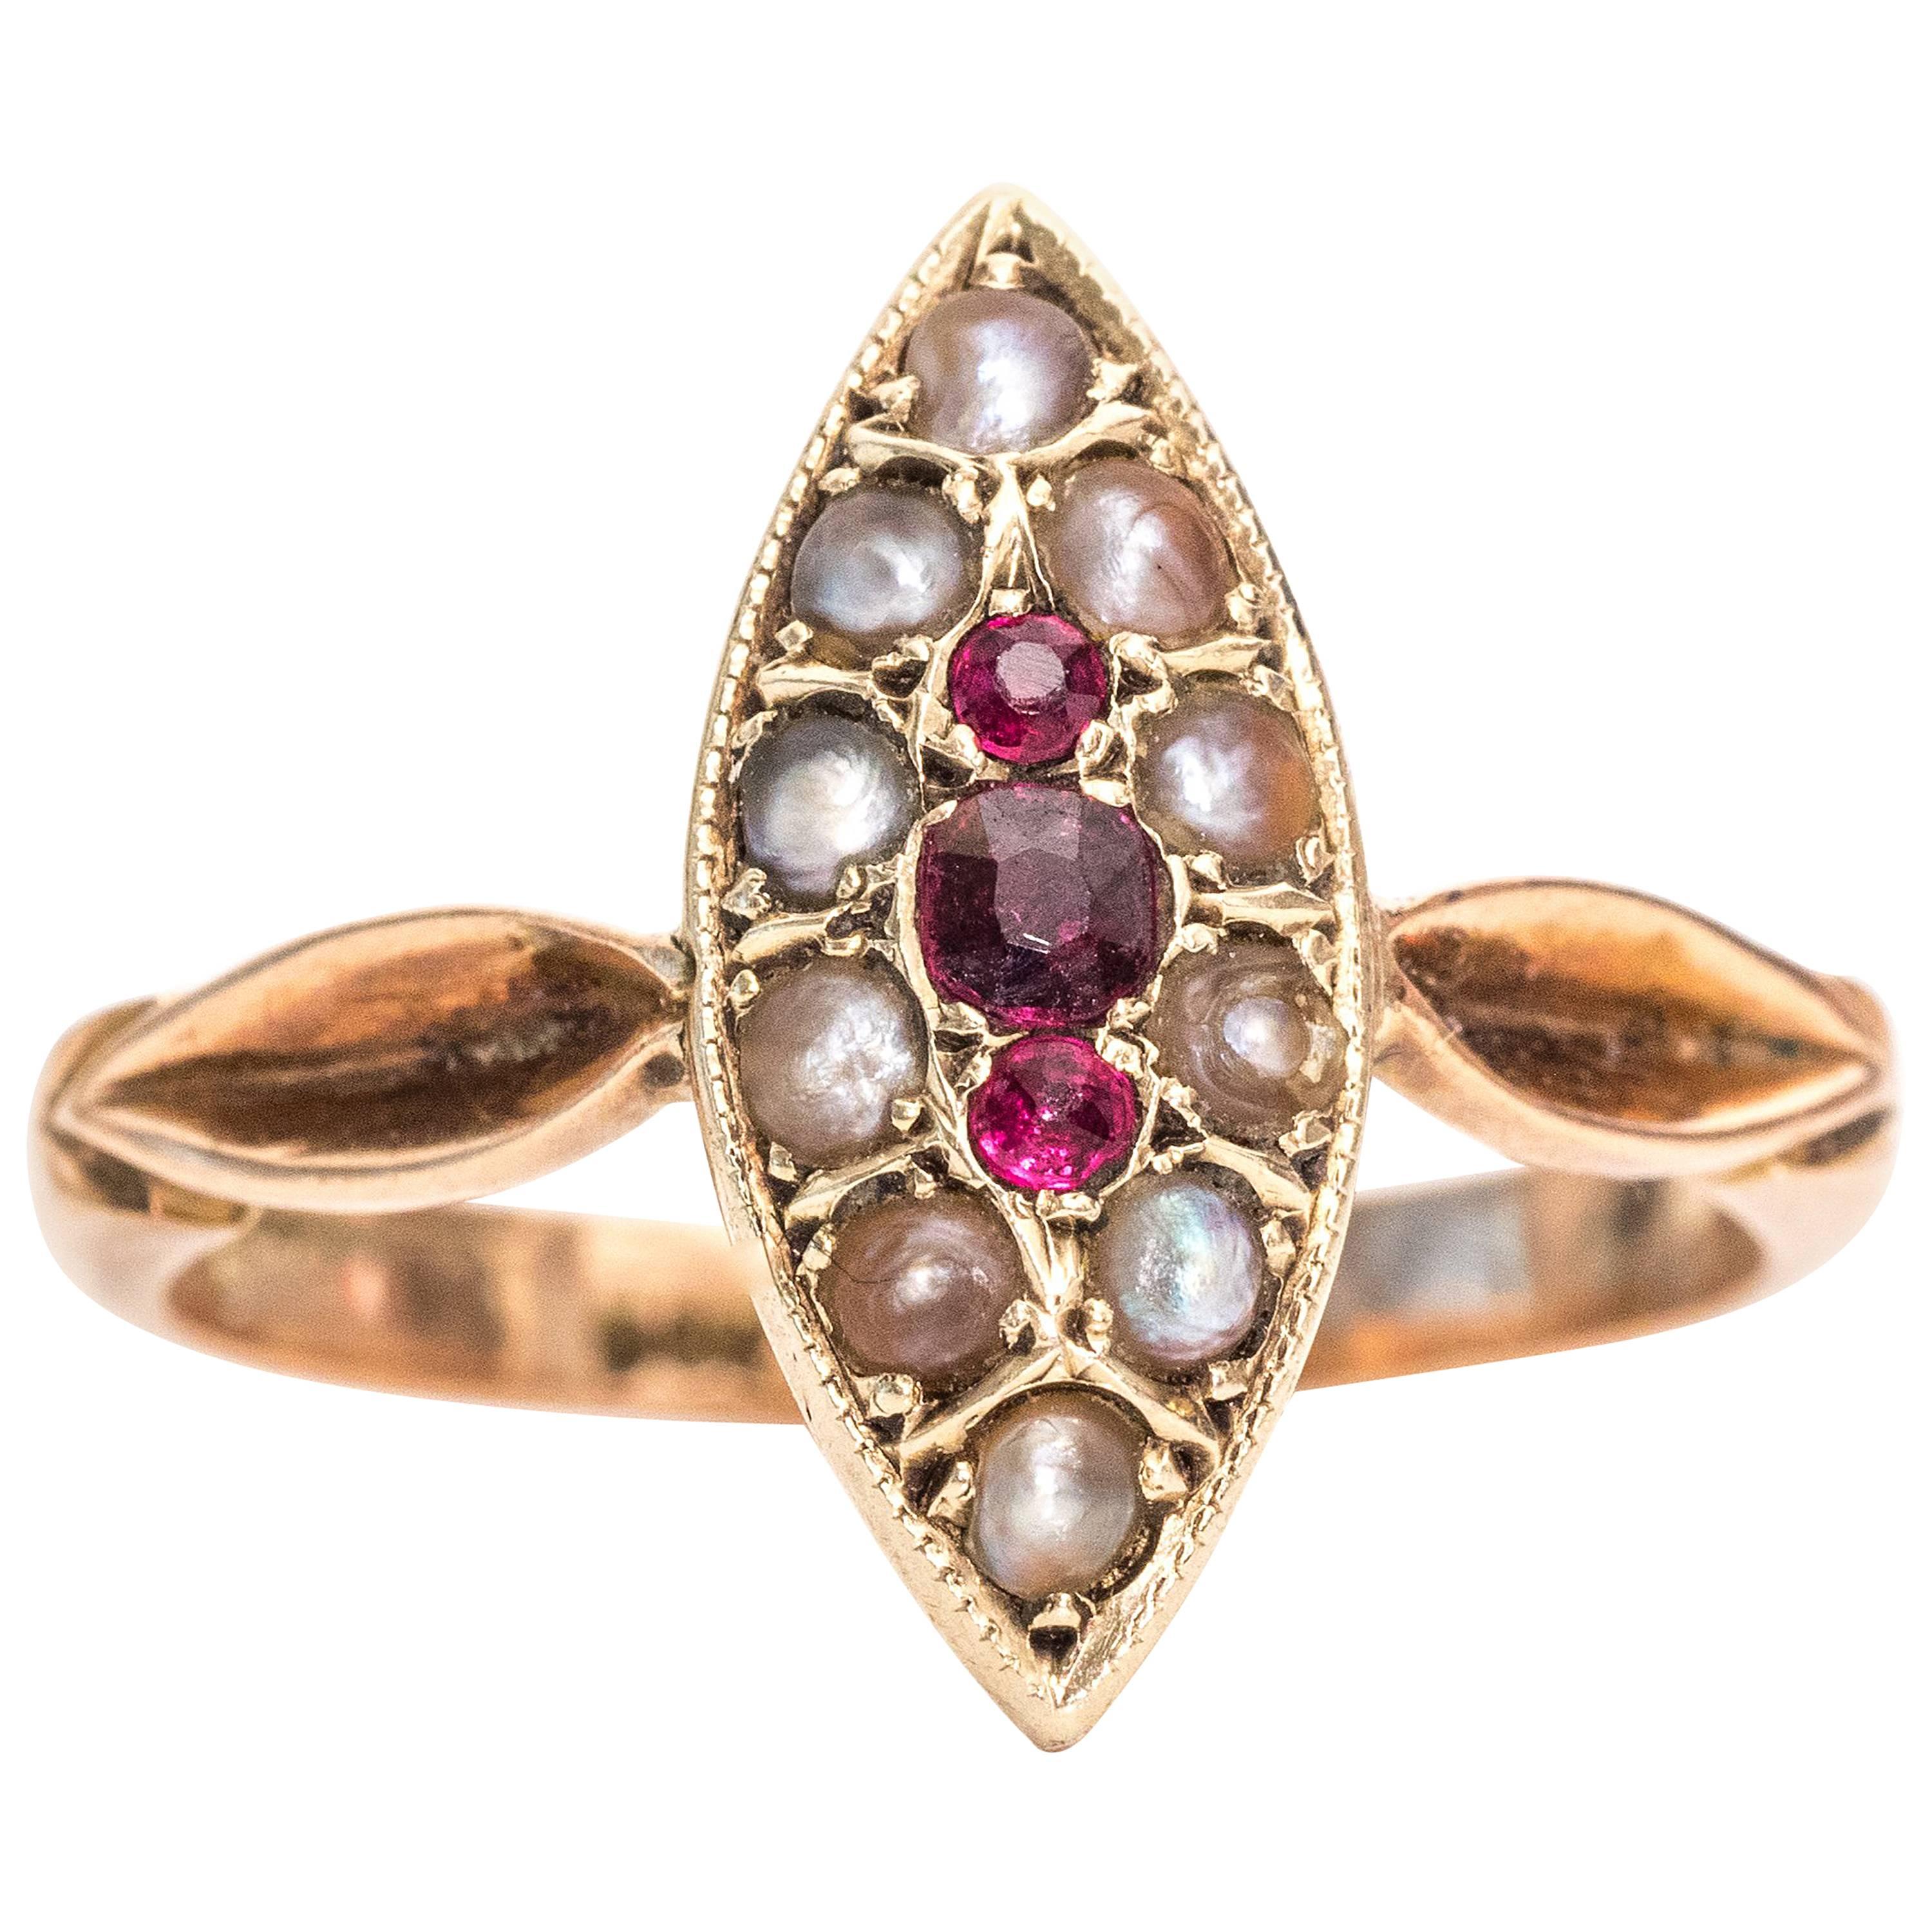 1890s Victorian Garnet and Seed Pearl 9 Karat Rose Gold Ring